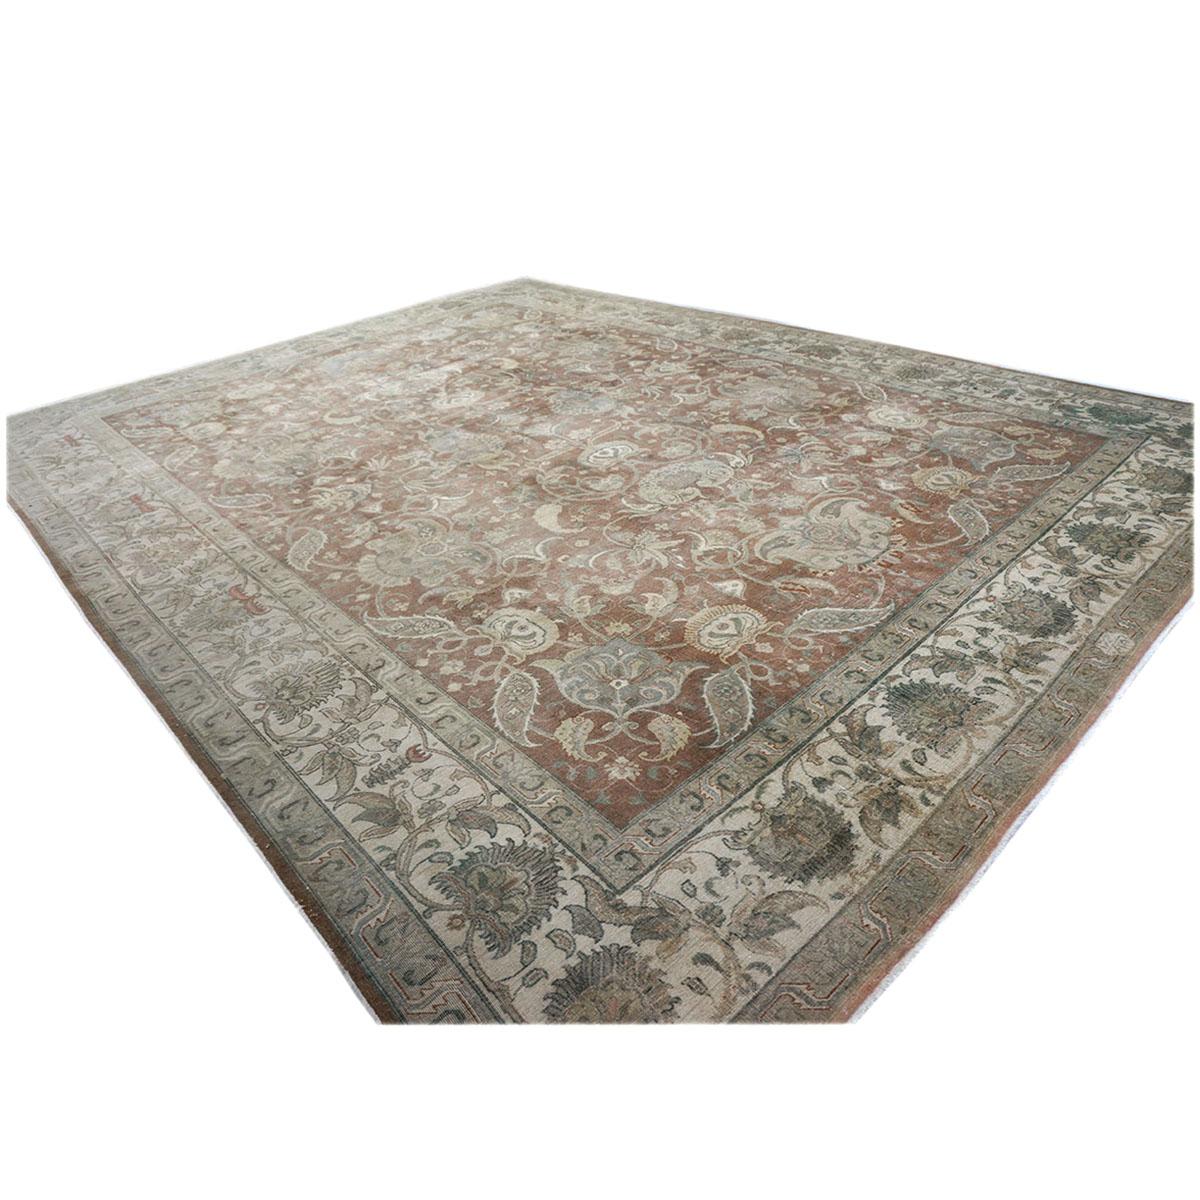 Early 20th Century Antique Distressed Persian Tabriz 10x14 Brown, Green, & Ivory Handmade Area Rug For Sale